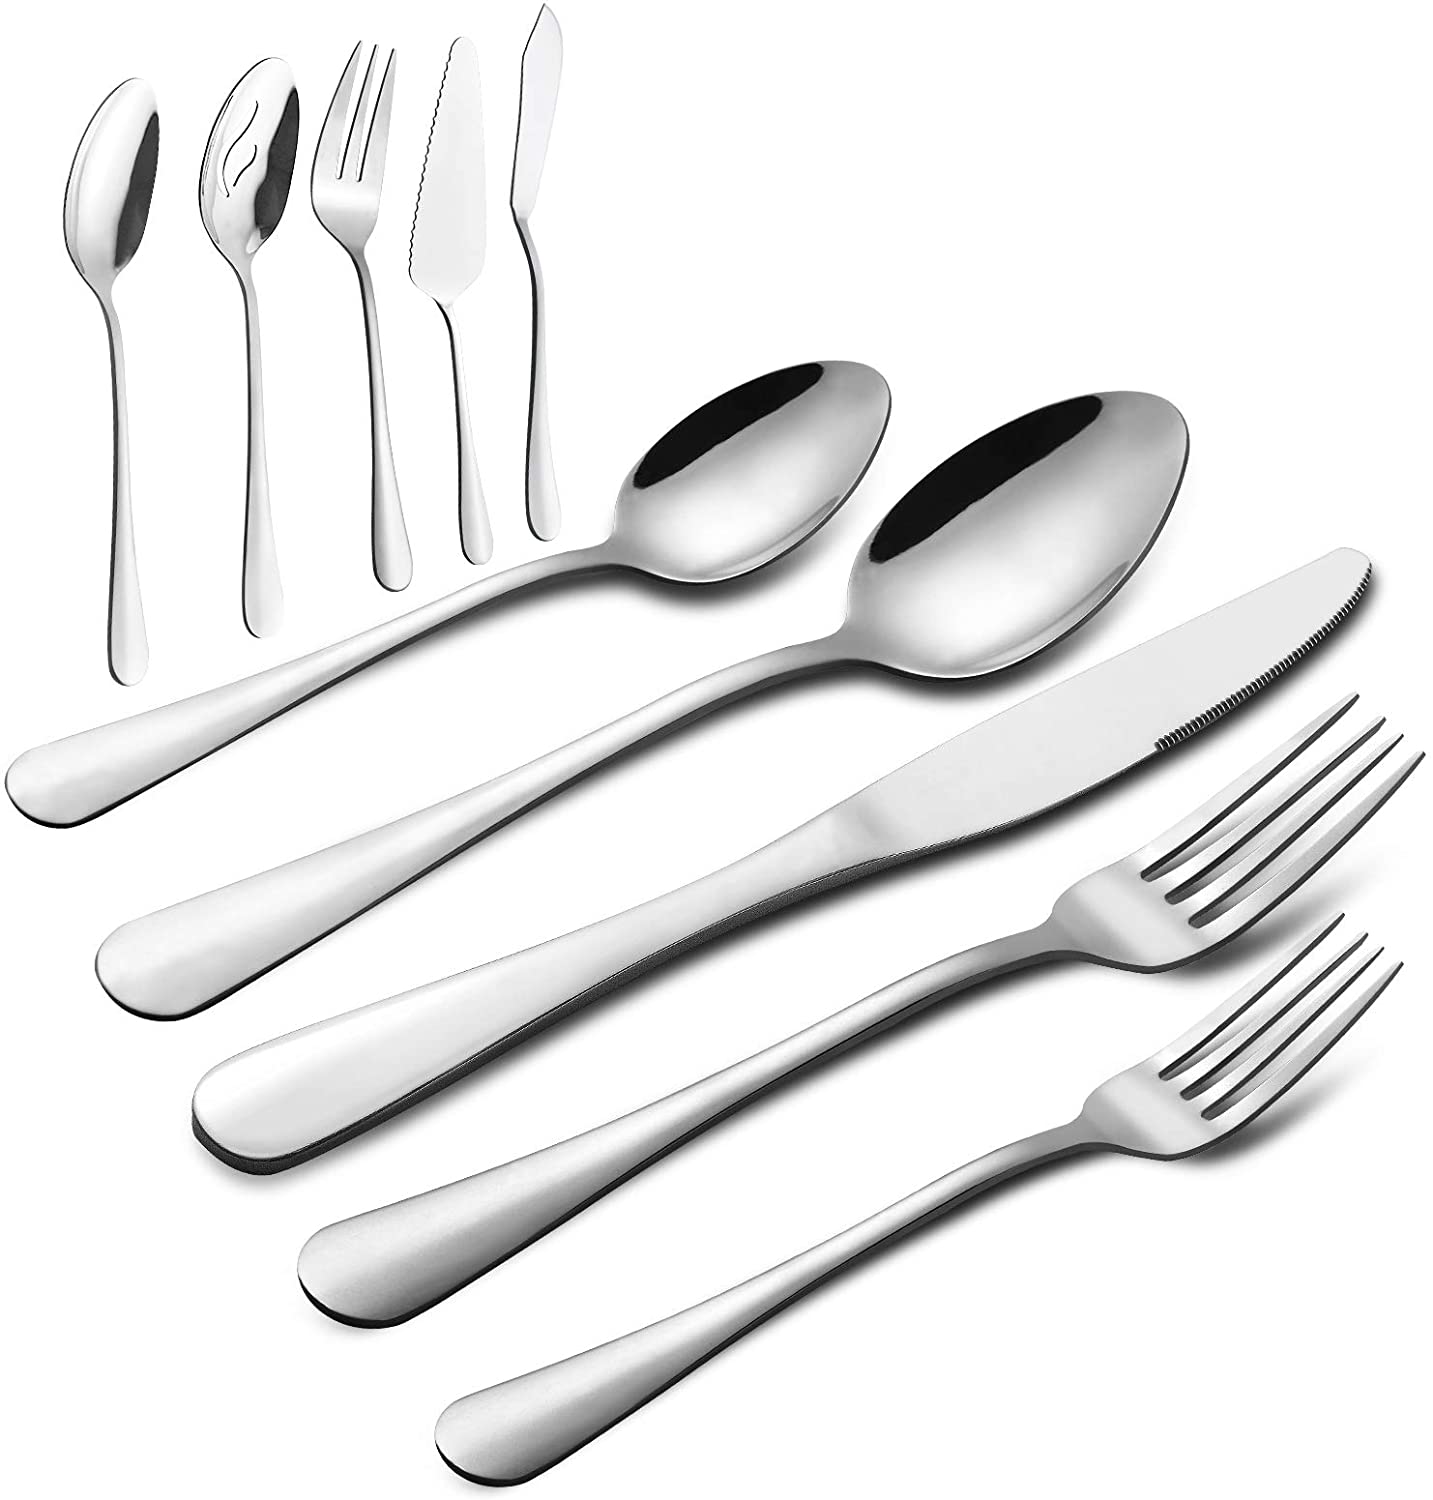 https://www.dontwasteyourmoney.com/wp-content/uploads/2022/03/m-mcirco-mirror-polished-stainless-steel-cutlery-set-65-piece-cutlery-sets.jpg